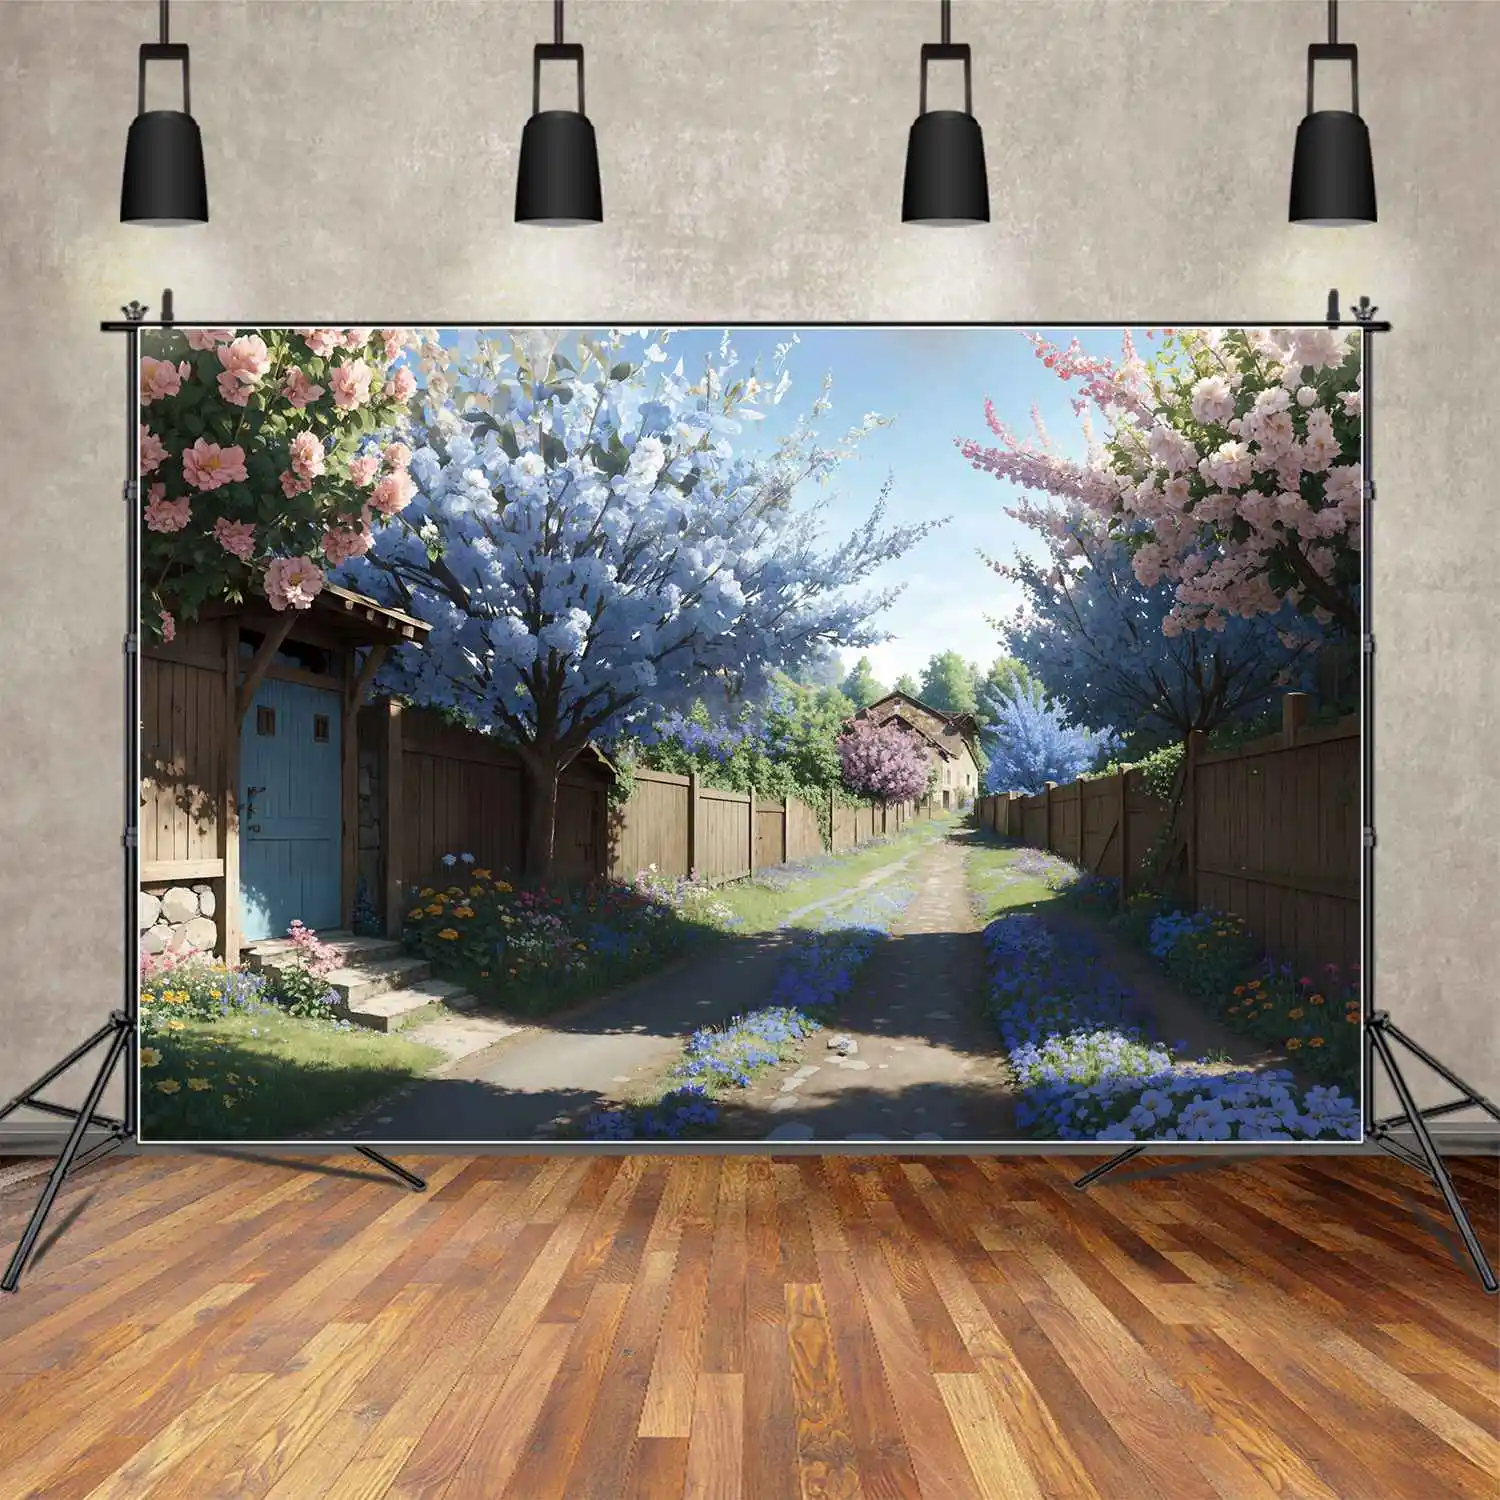 

Flowers Blossom Village Backdrops Photography Spring Rural Home Custom Baby Photobooth Photographic Backgrounds Photoshoot Props